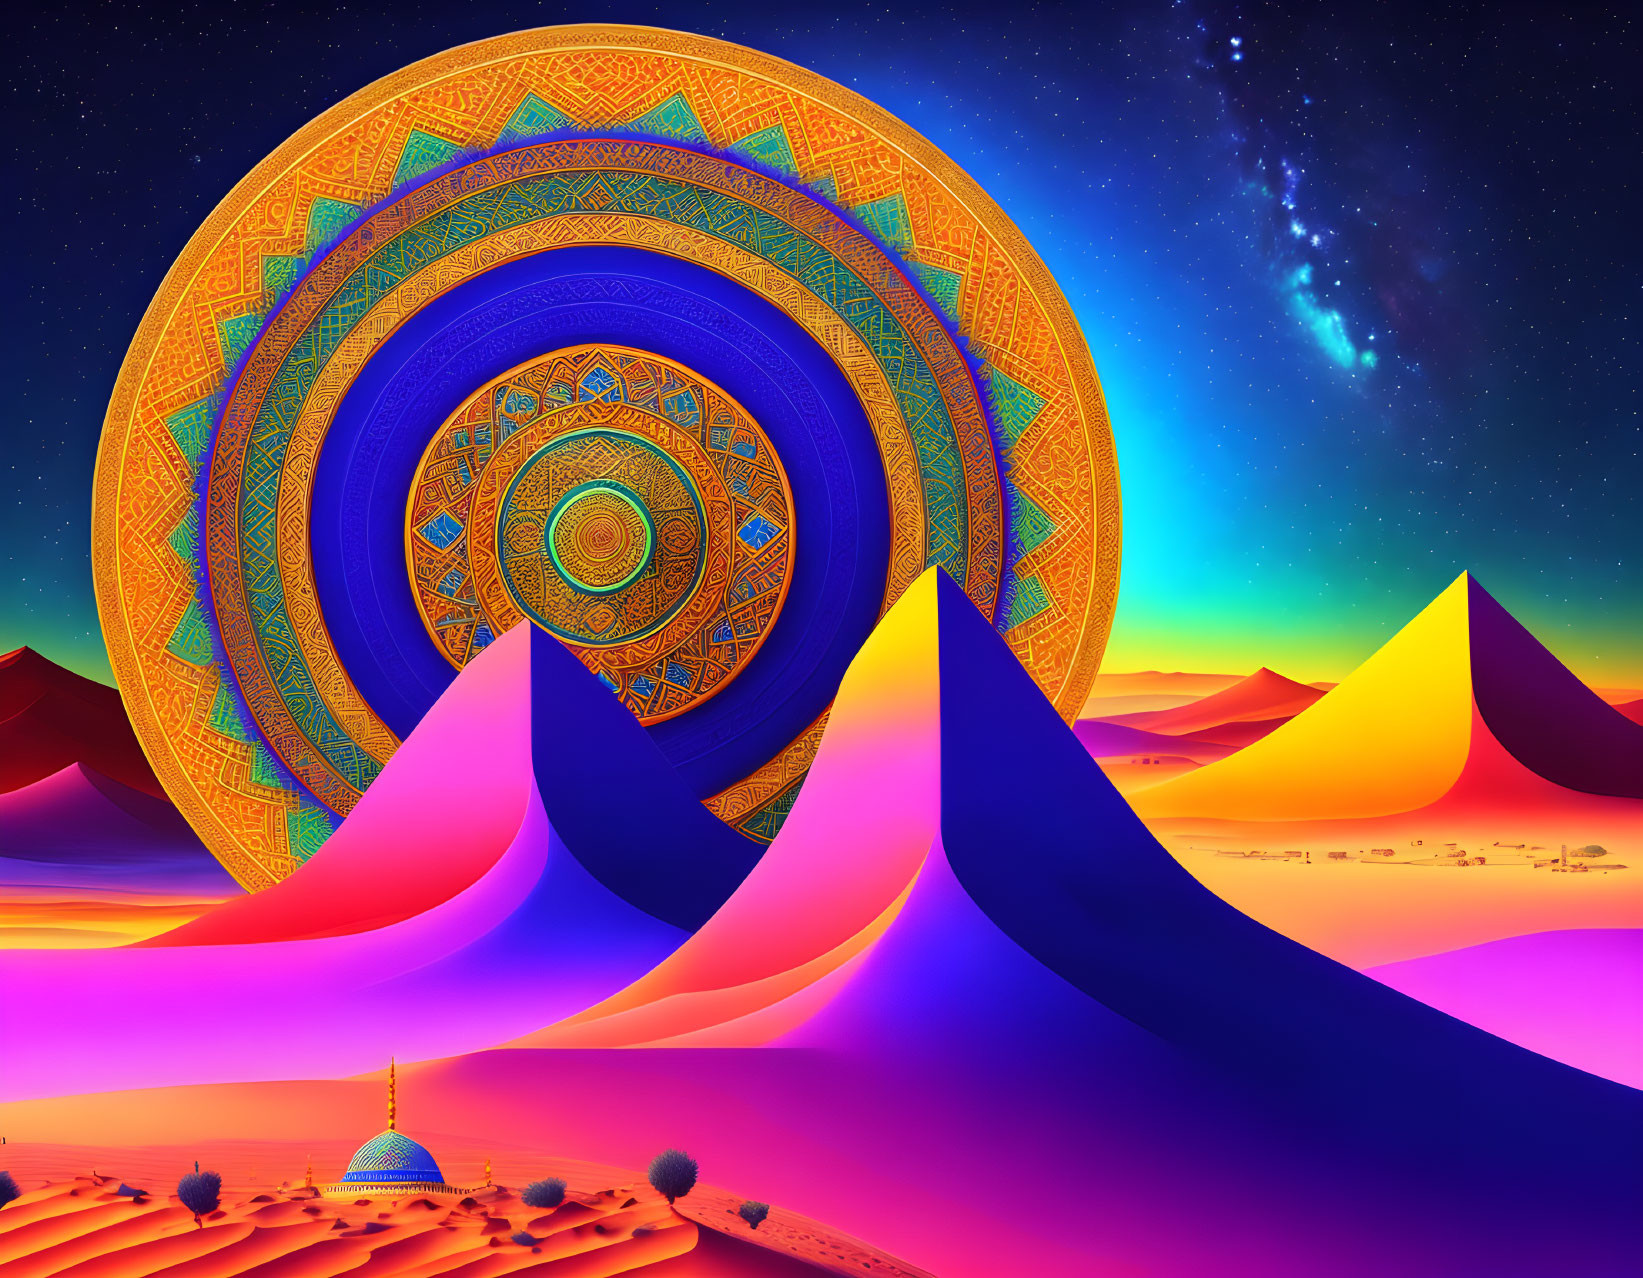 Colorful psychedelic desert scene with mandala and starlit sky.